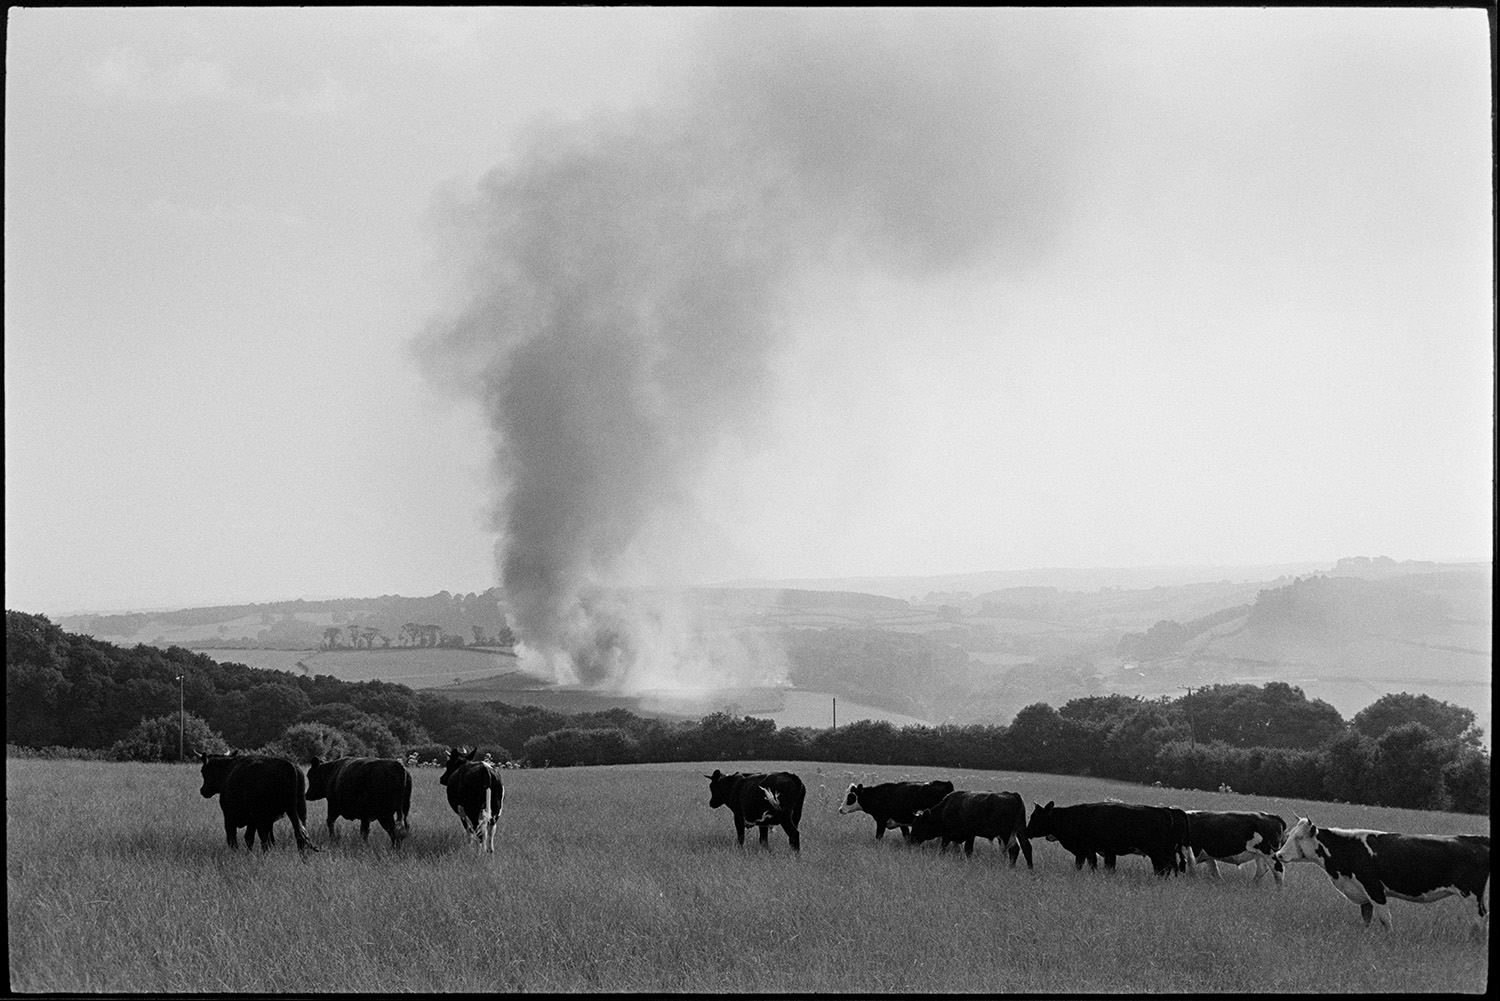 Landscape with cattle with fires from stubble burning in distance. 
[Cattle grazing in a field at Harepath, Beaford. Smoke can be seen rising from burning crop stubble in a field in the background.]